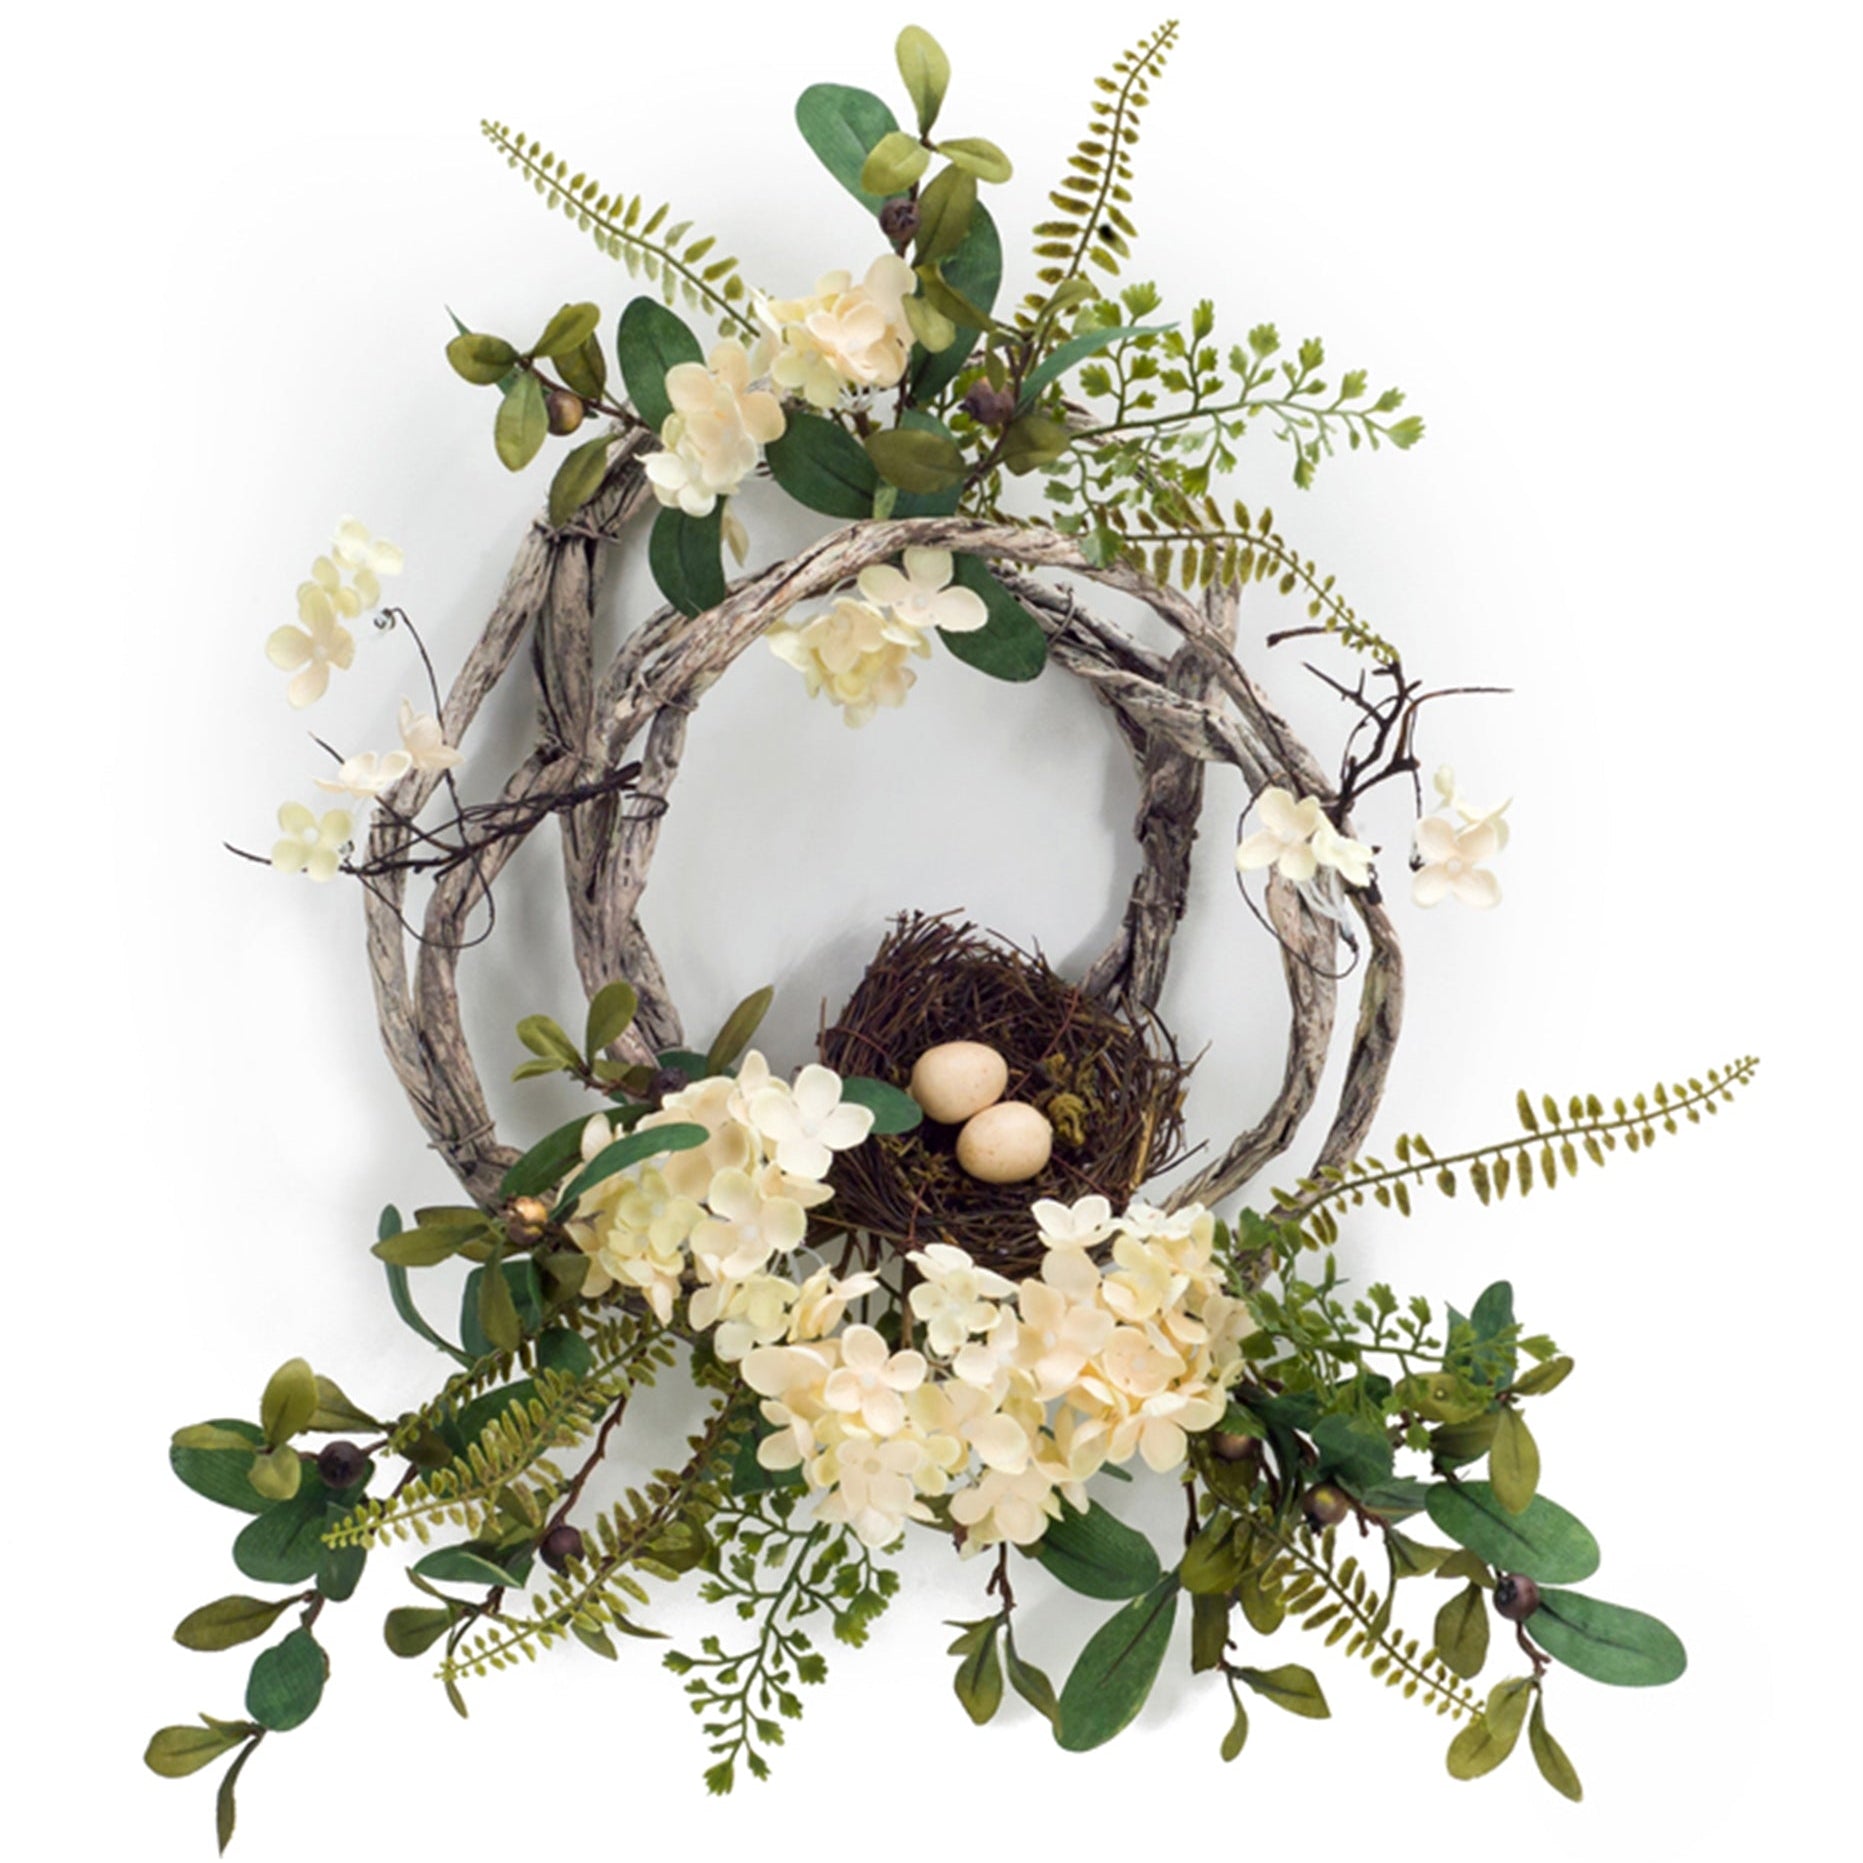 Woven-Grapevine-Wreath-with-Hydrangea-and-Bird-Nest-Accents,-Set-of-4-Wreaths